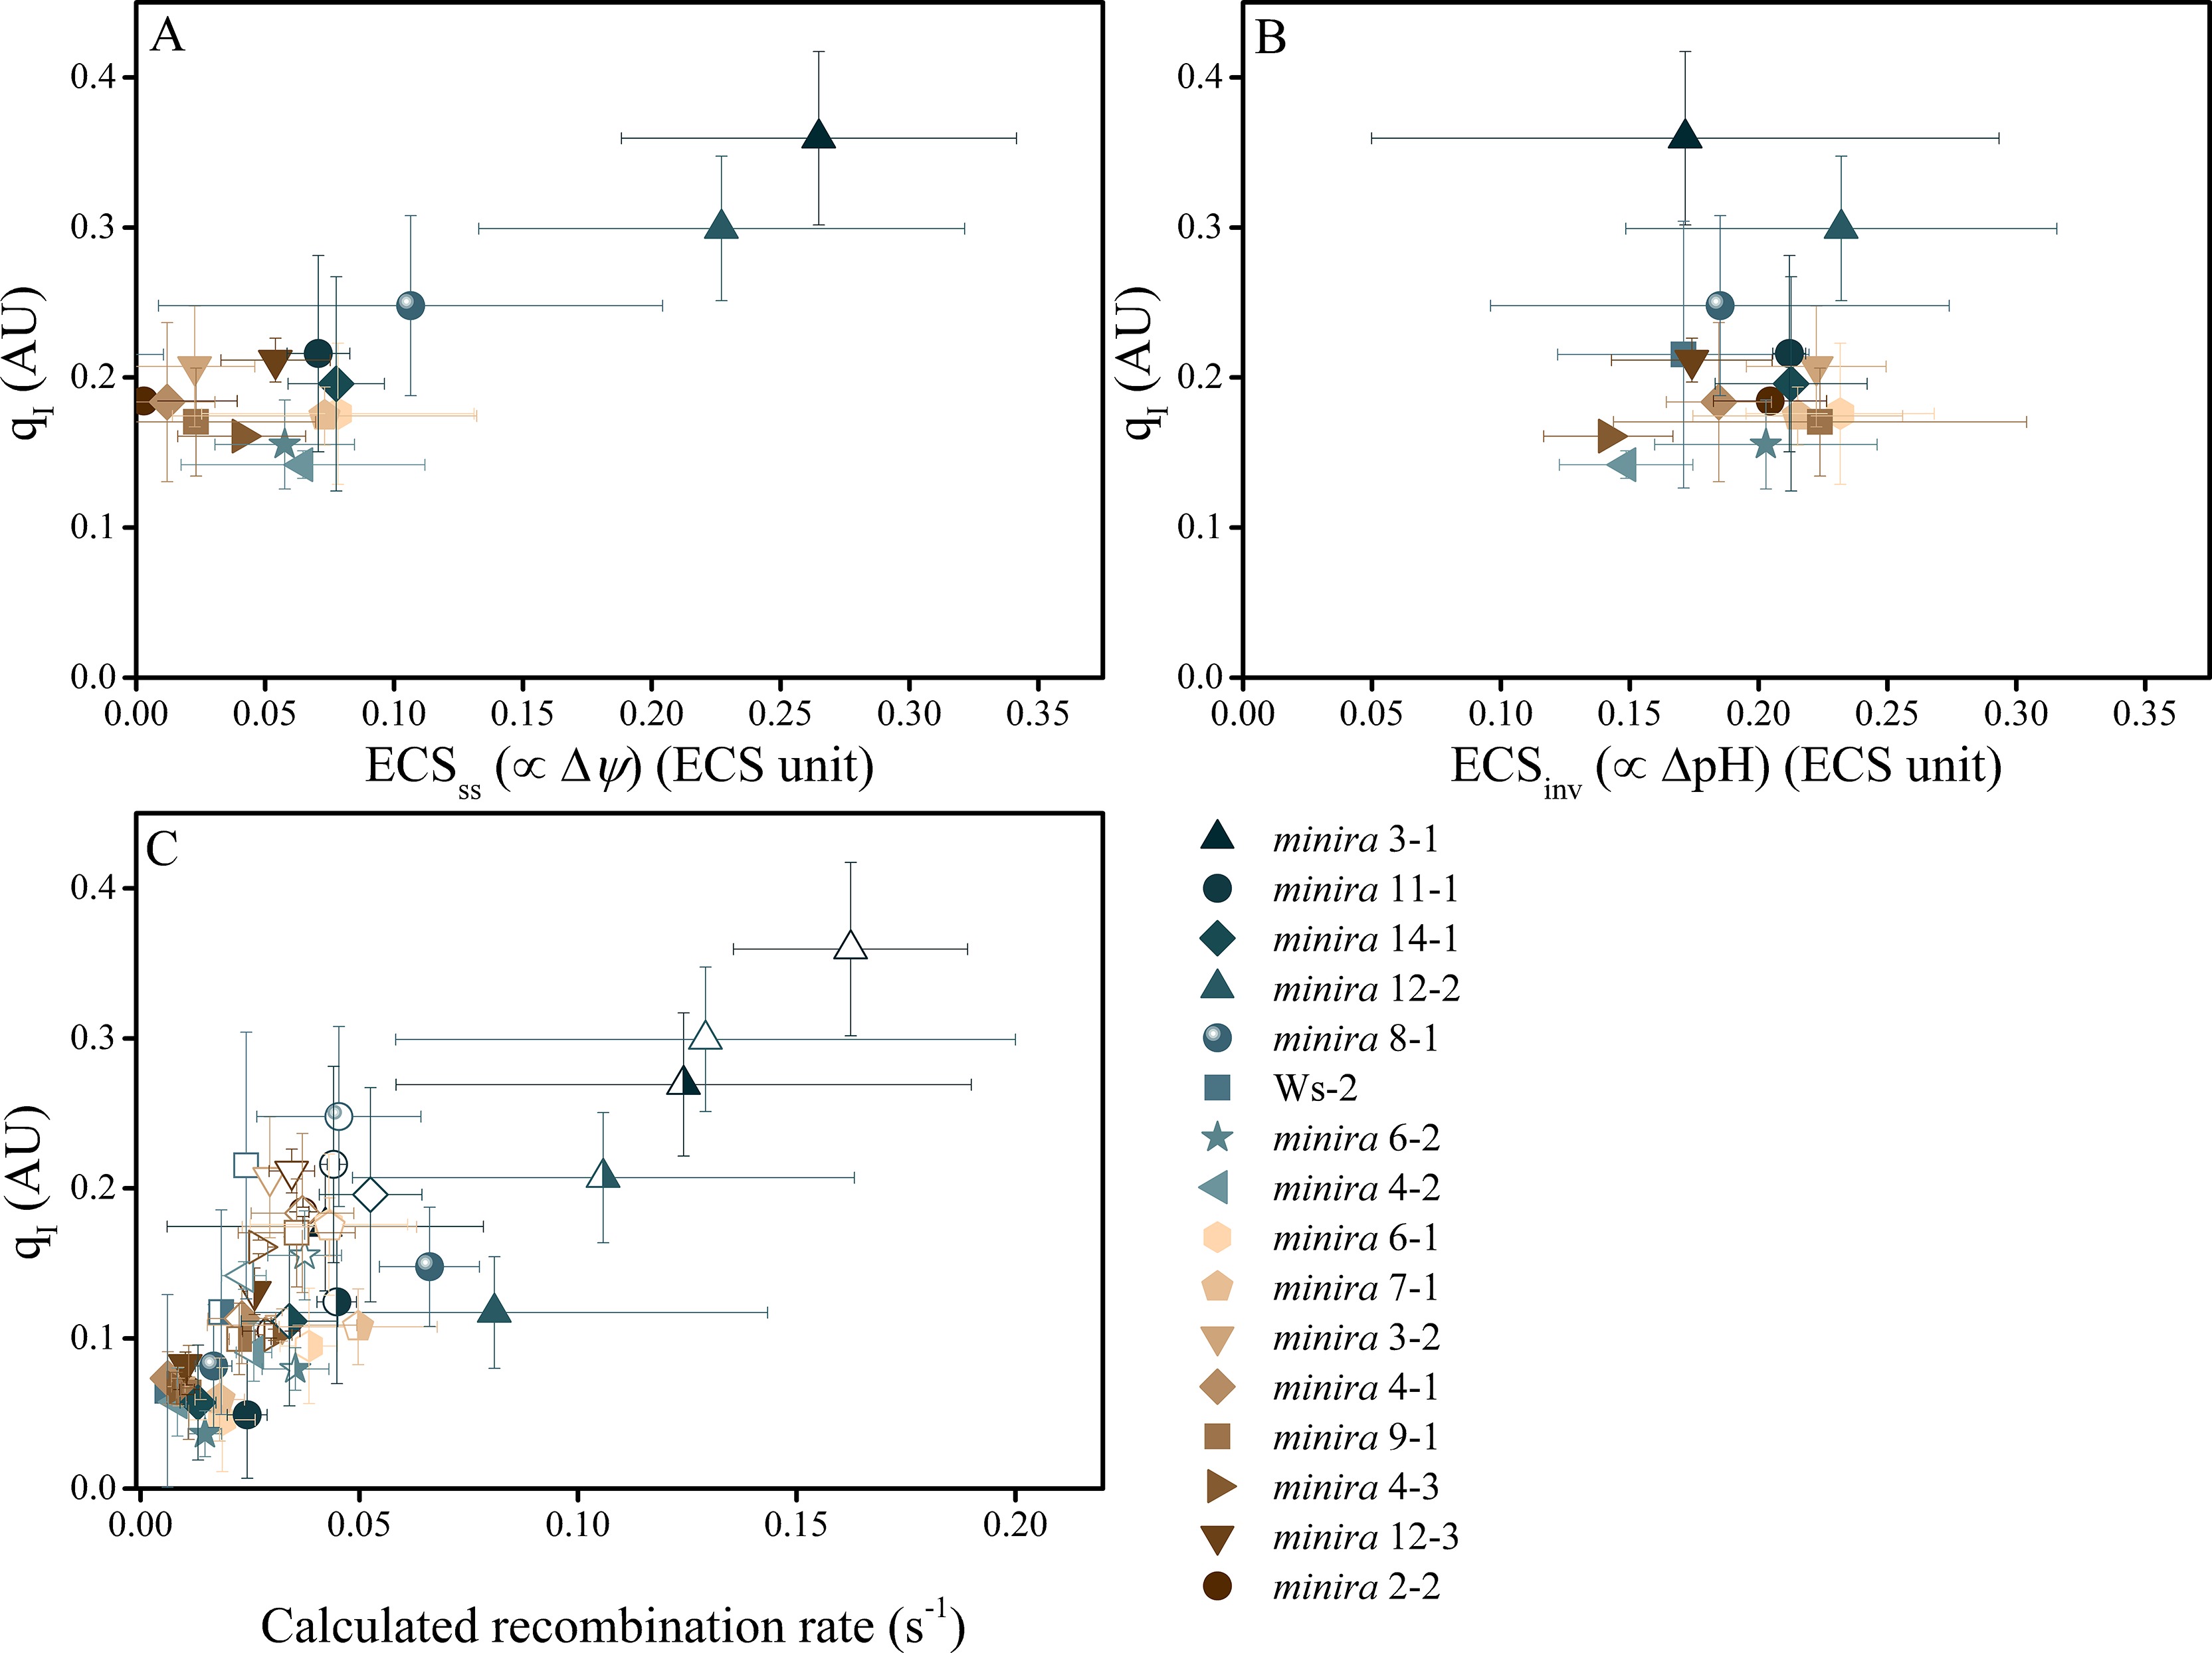 inhibition is strongly cor with Î”Ïˆ but not Î”pH in minira lines